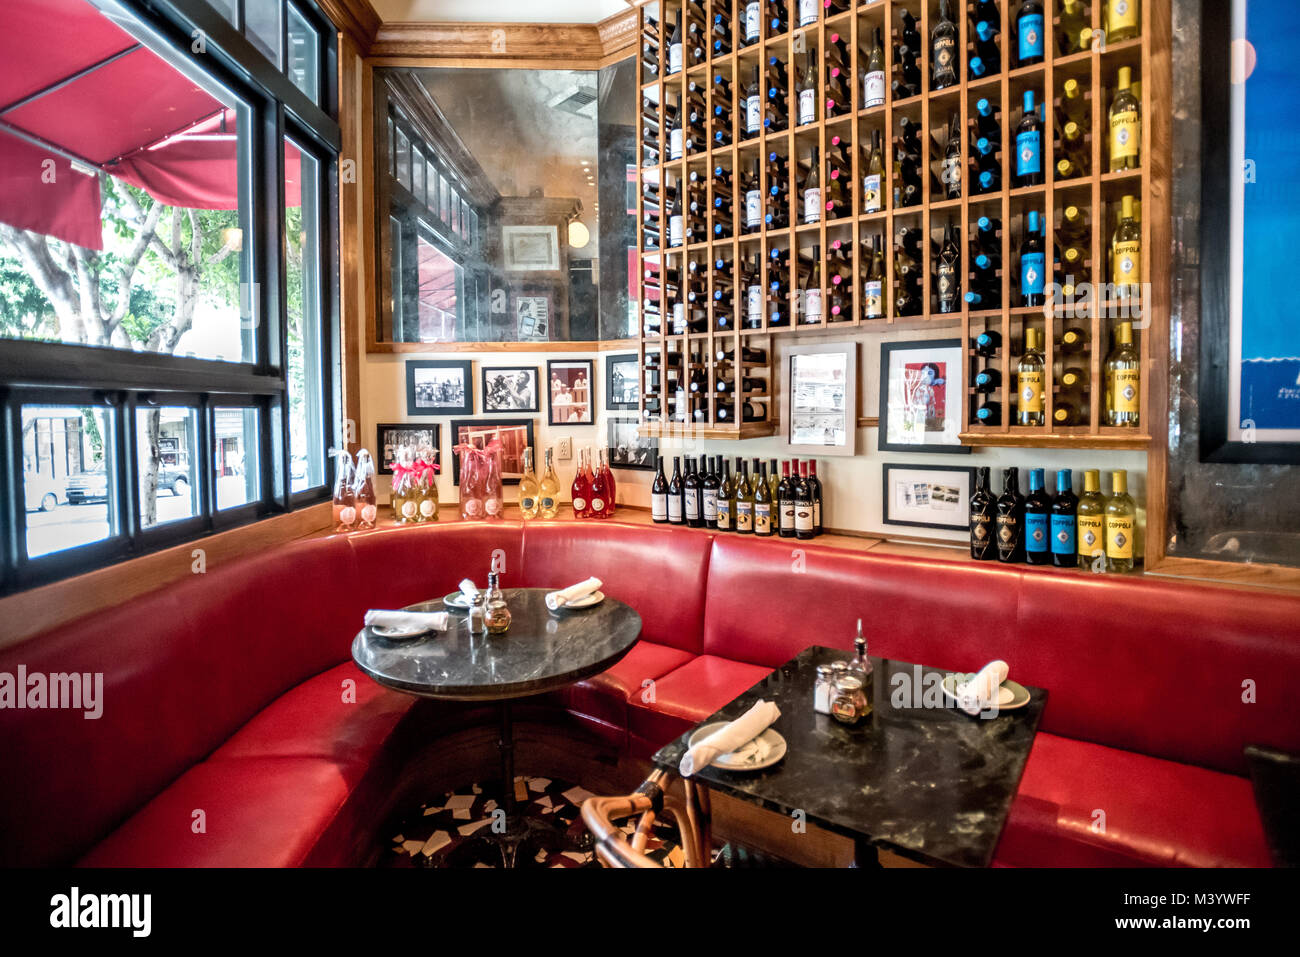 Cafe Zoetrope seating in flatiron angle corner of this wine bar restaurant and cafe in North Beach San Francisco with Coppola wine bottles in rack Stock Photo